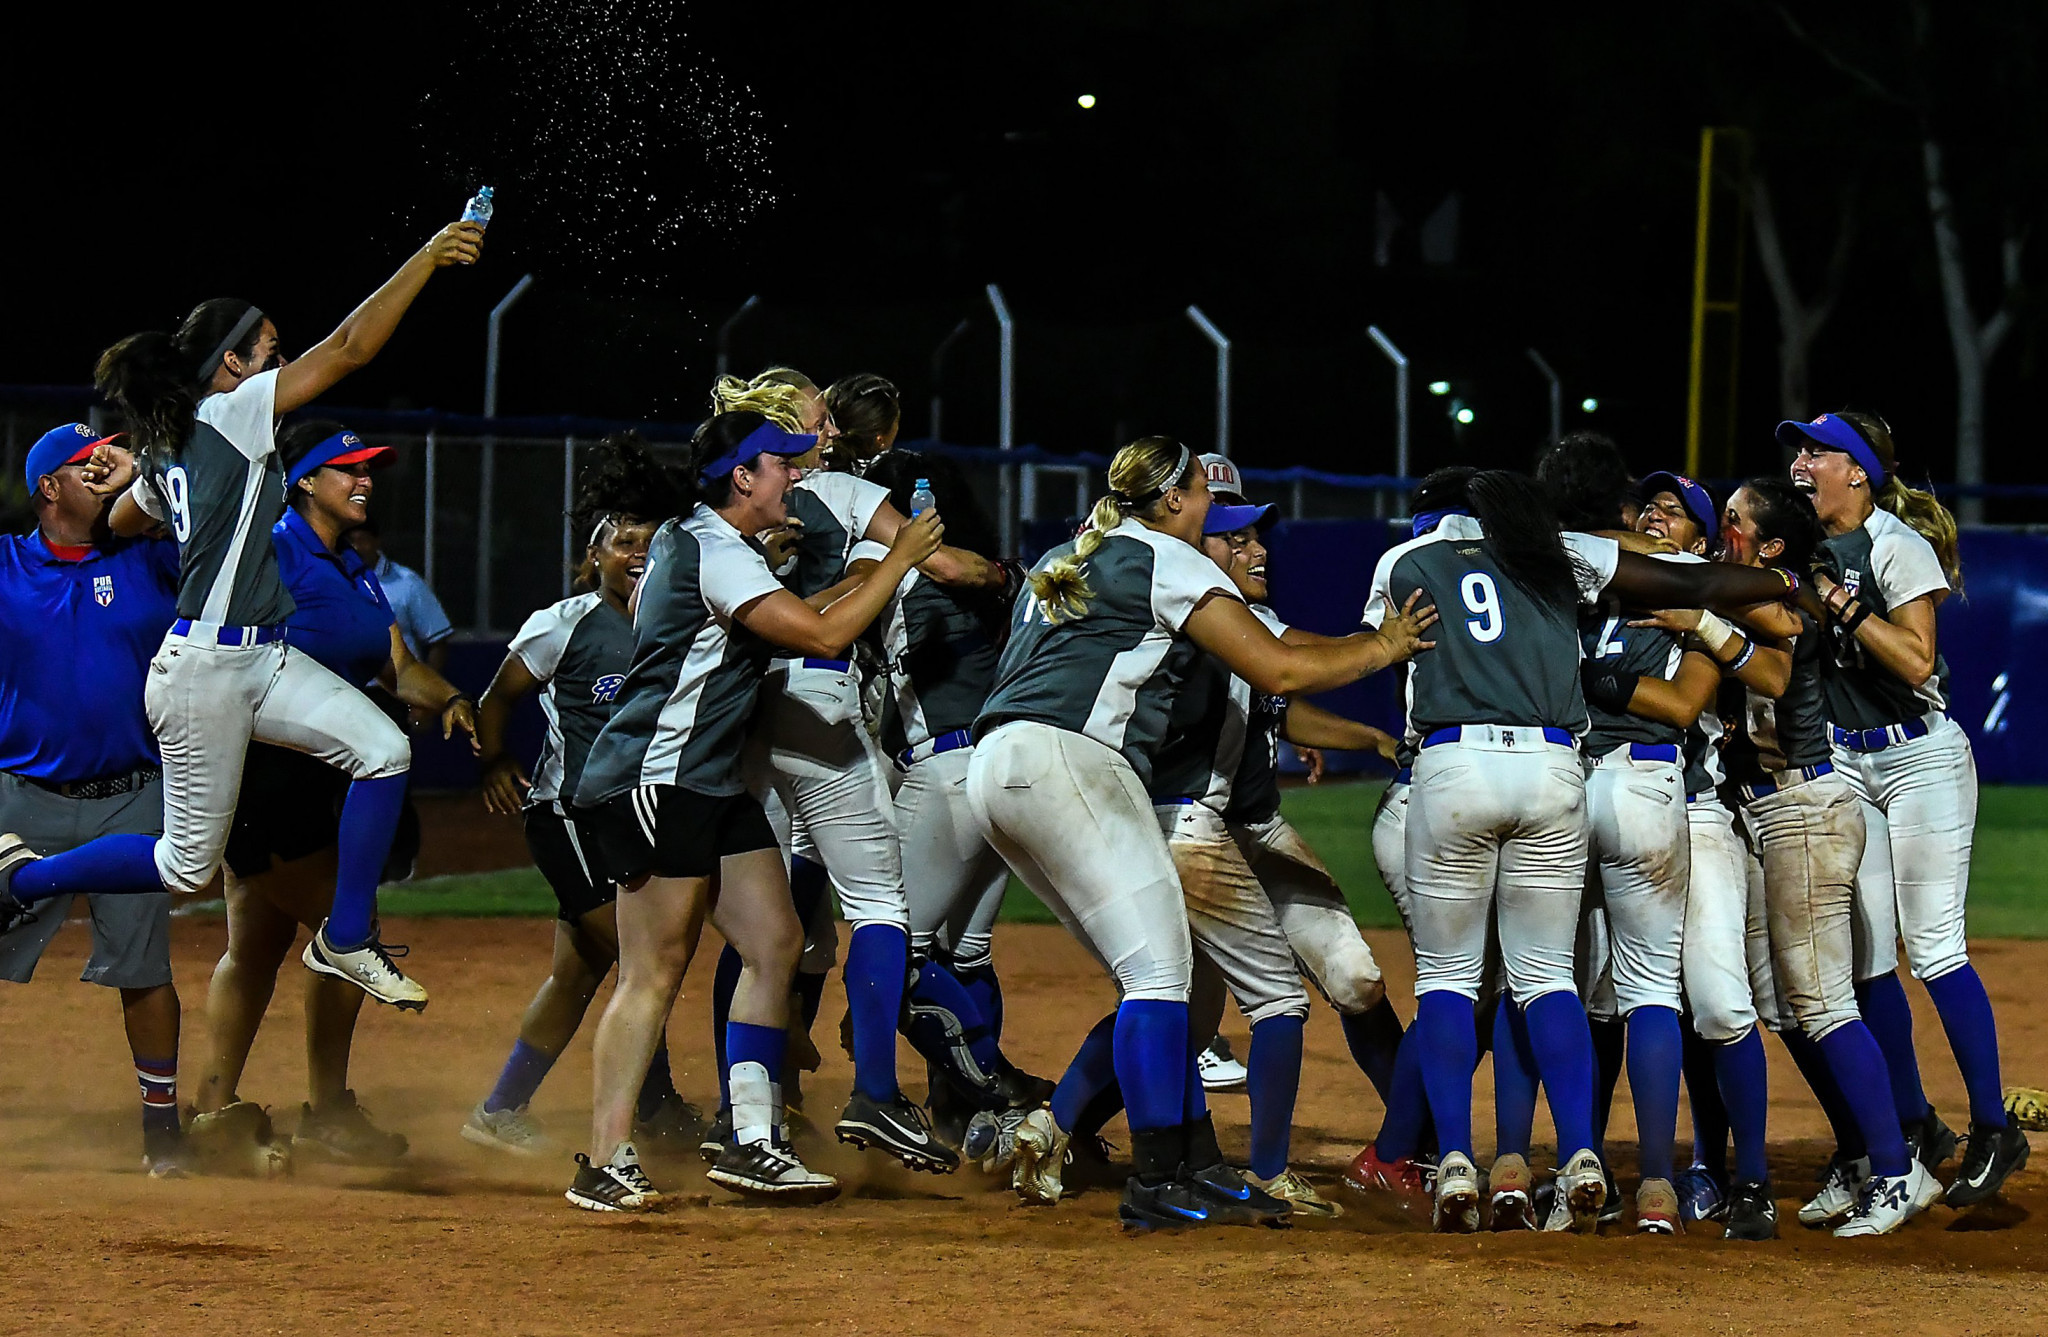 Puerto Rico replaced China in the Birmingham 2022 softball line-up ©Getty Images